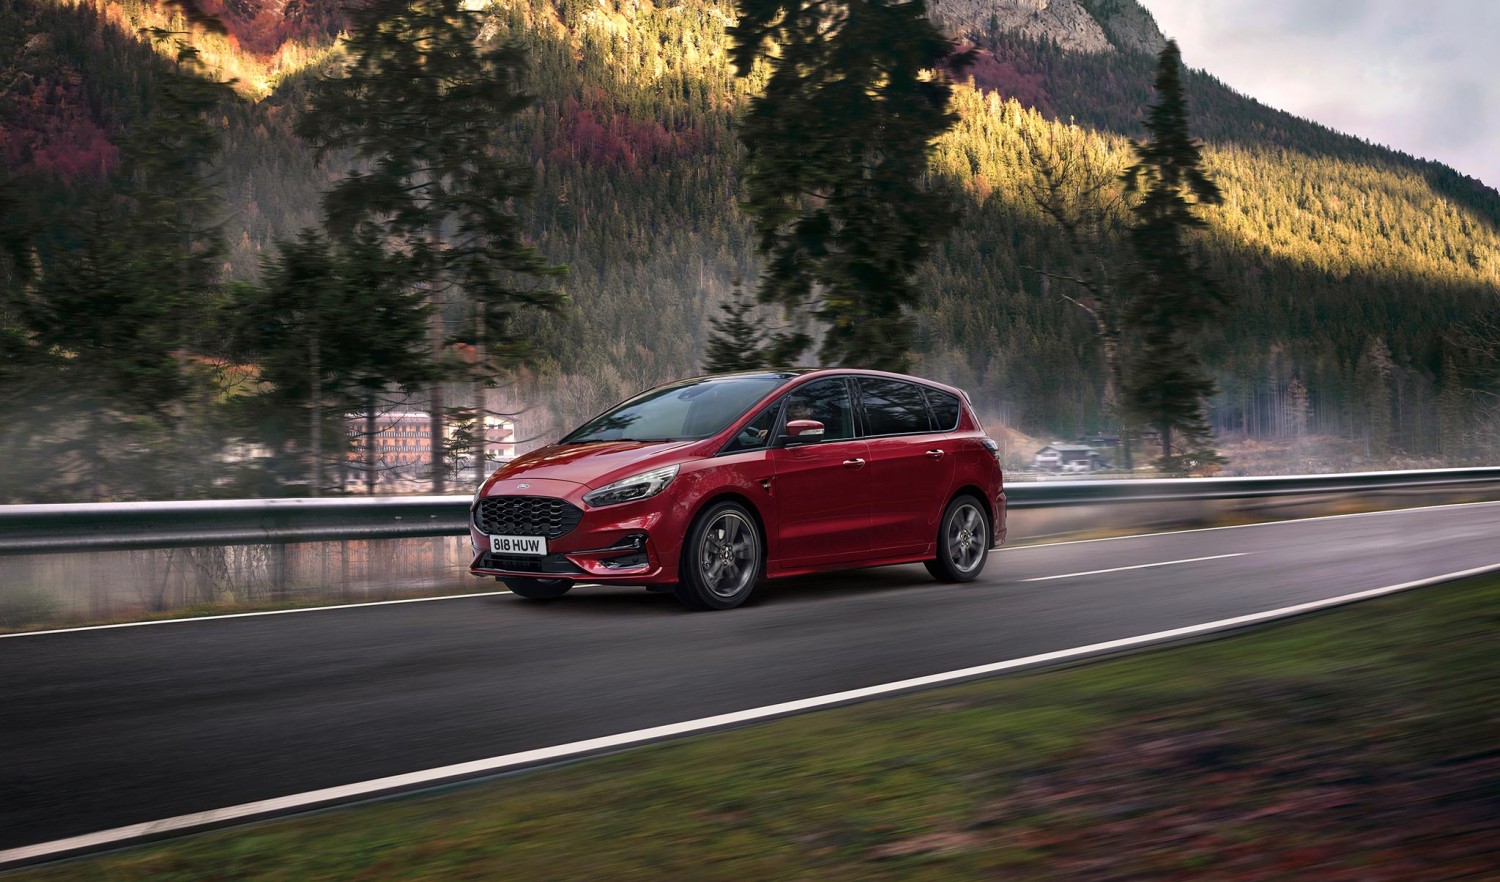 Car News | Ford launches new hybrid S-Max seven-seater | CompleteCar.ie